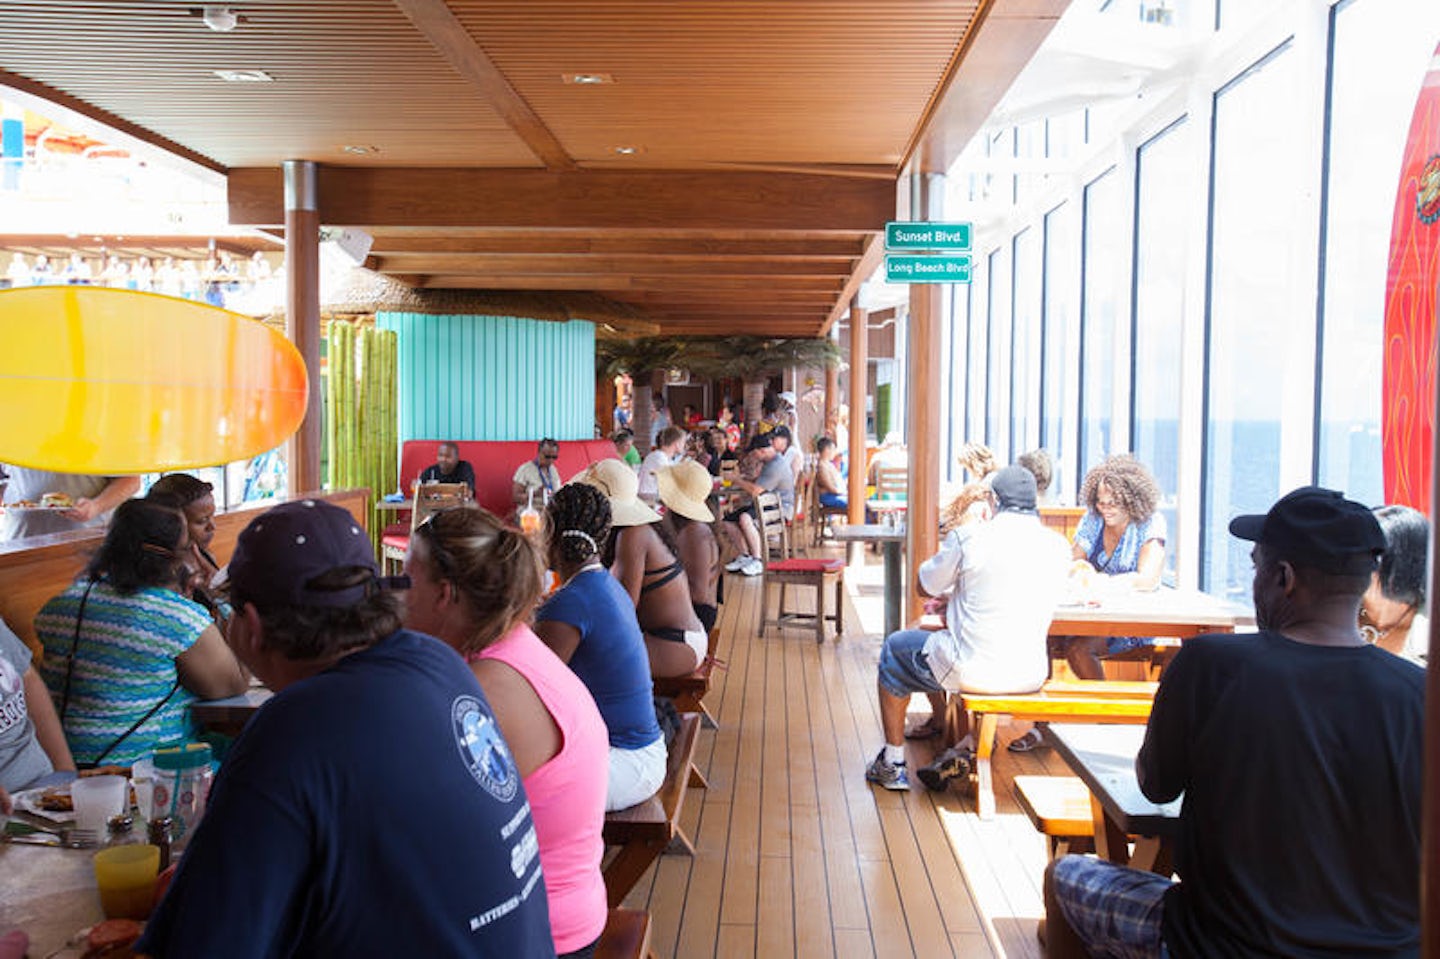 Guy's Burger Joint on Carnival Breeze